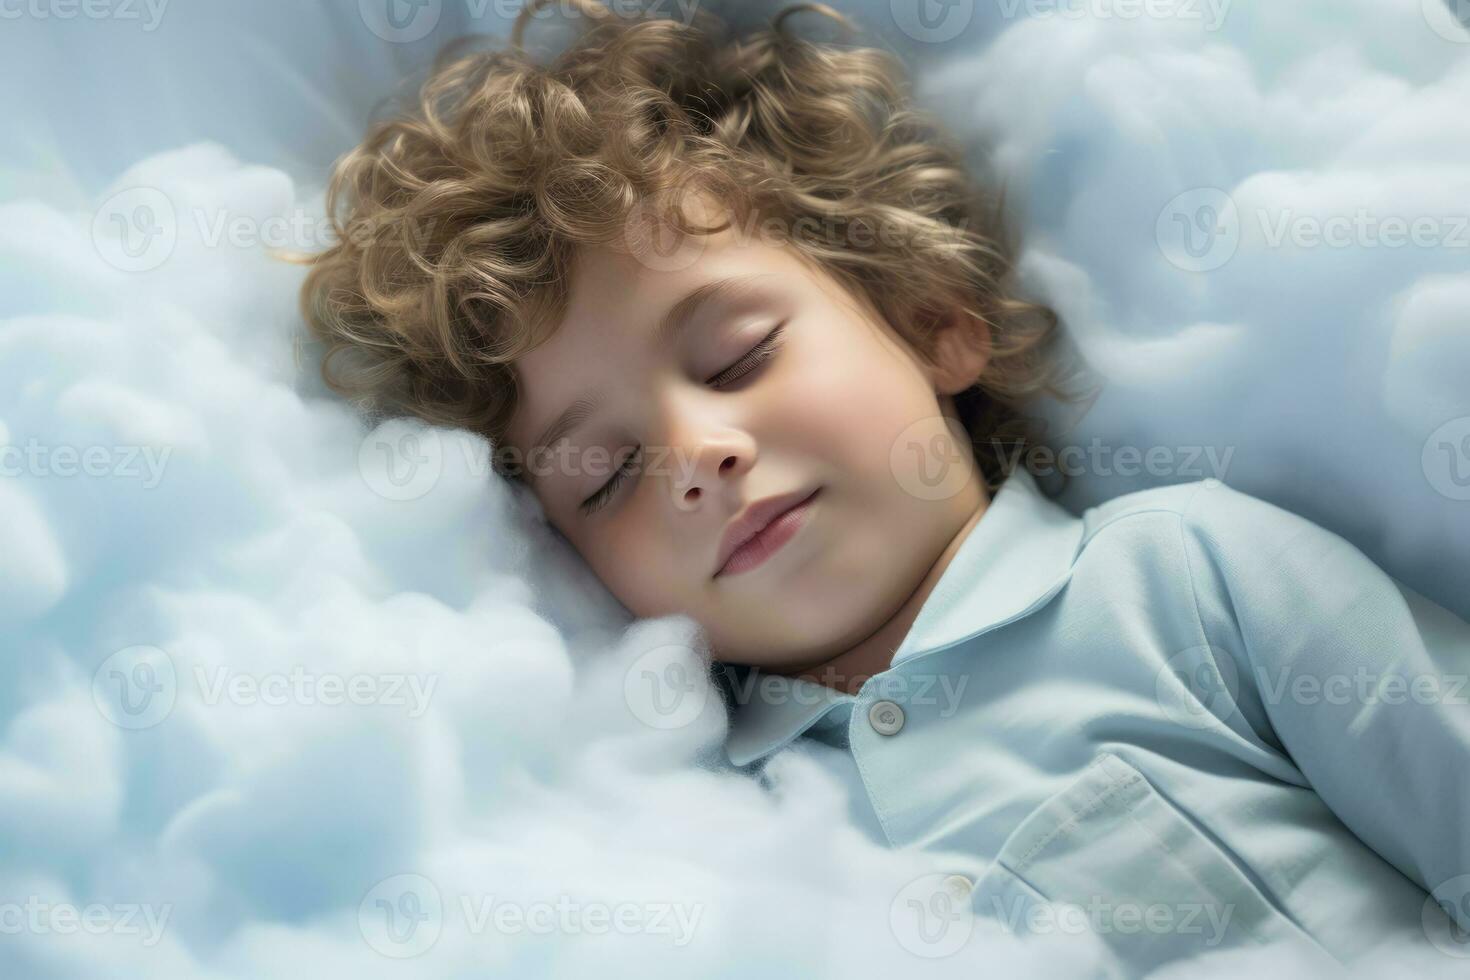 Kid sleeps on a cloud like in the bed photo